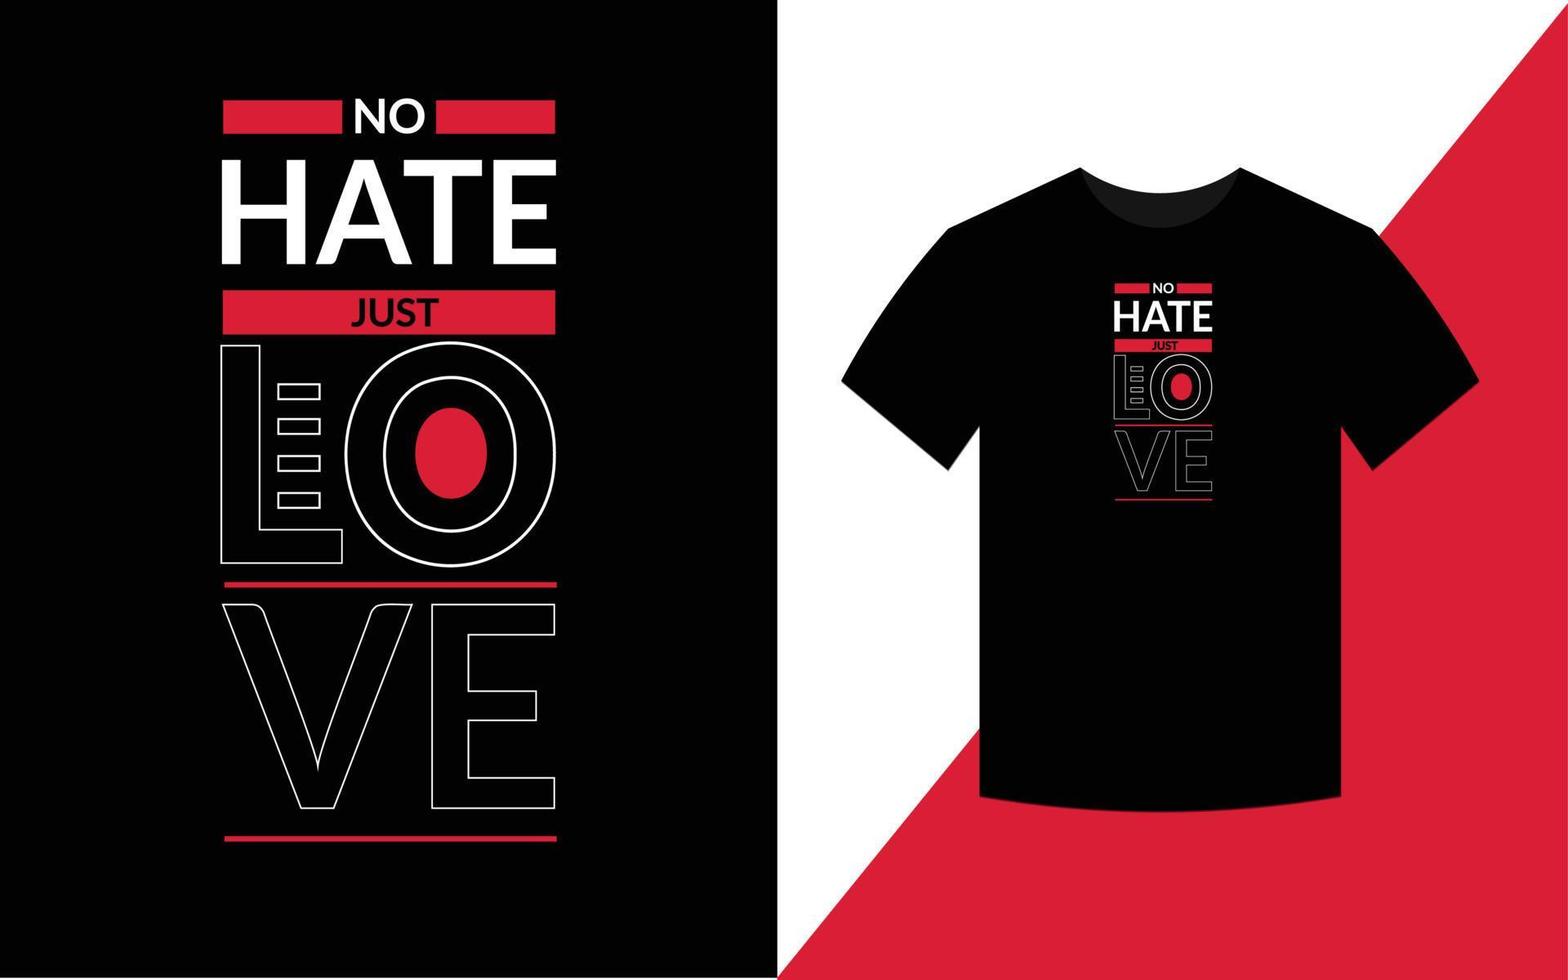 No hate just love Typography Inspirational Quotes t shirt design for fashion apparel printing. vector